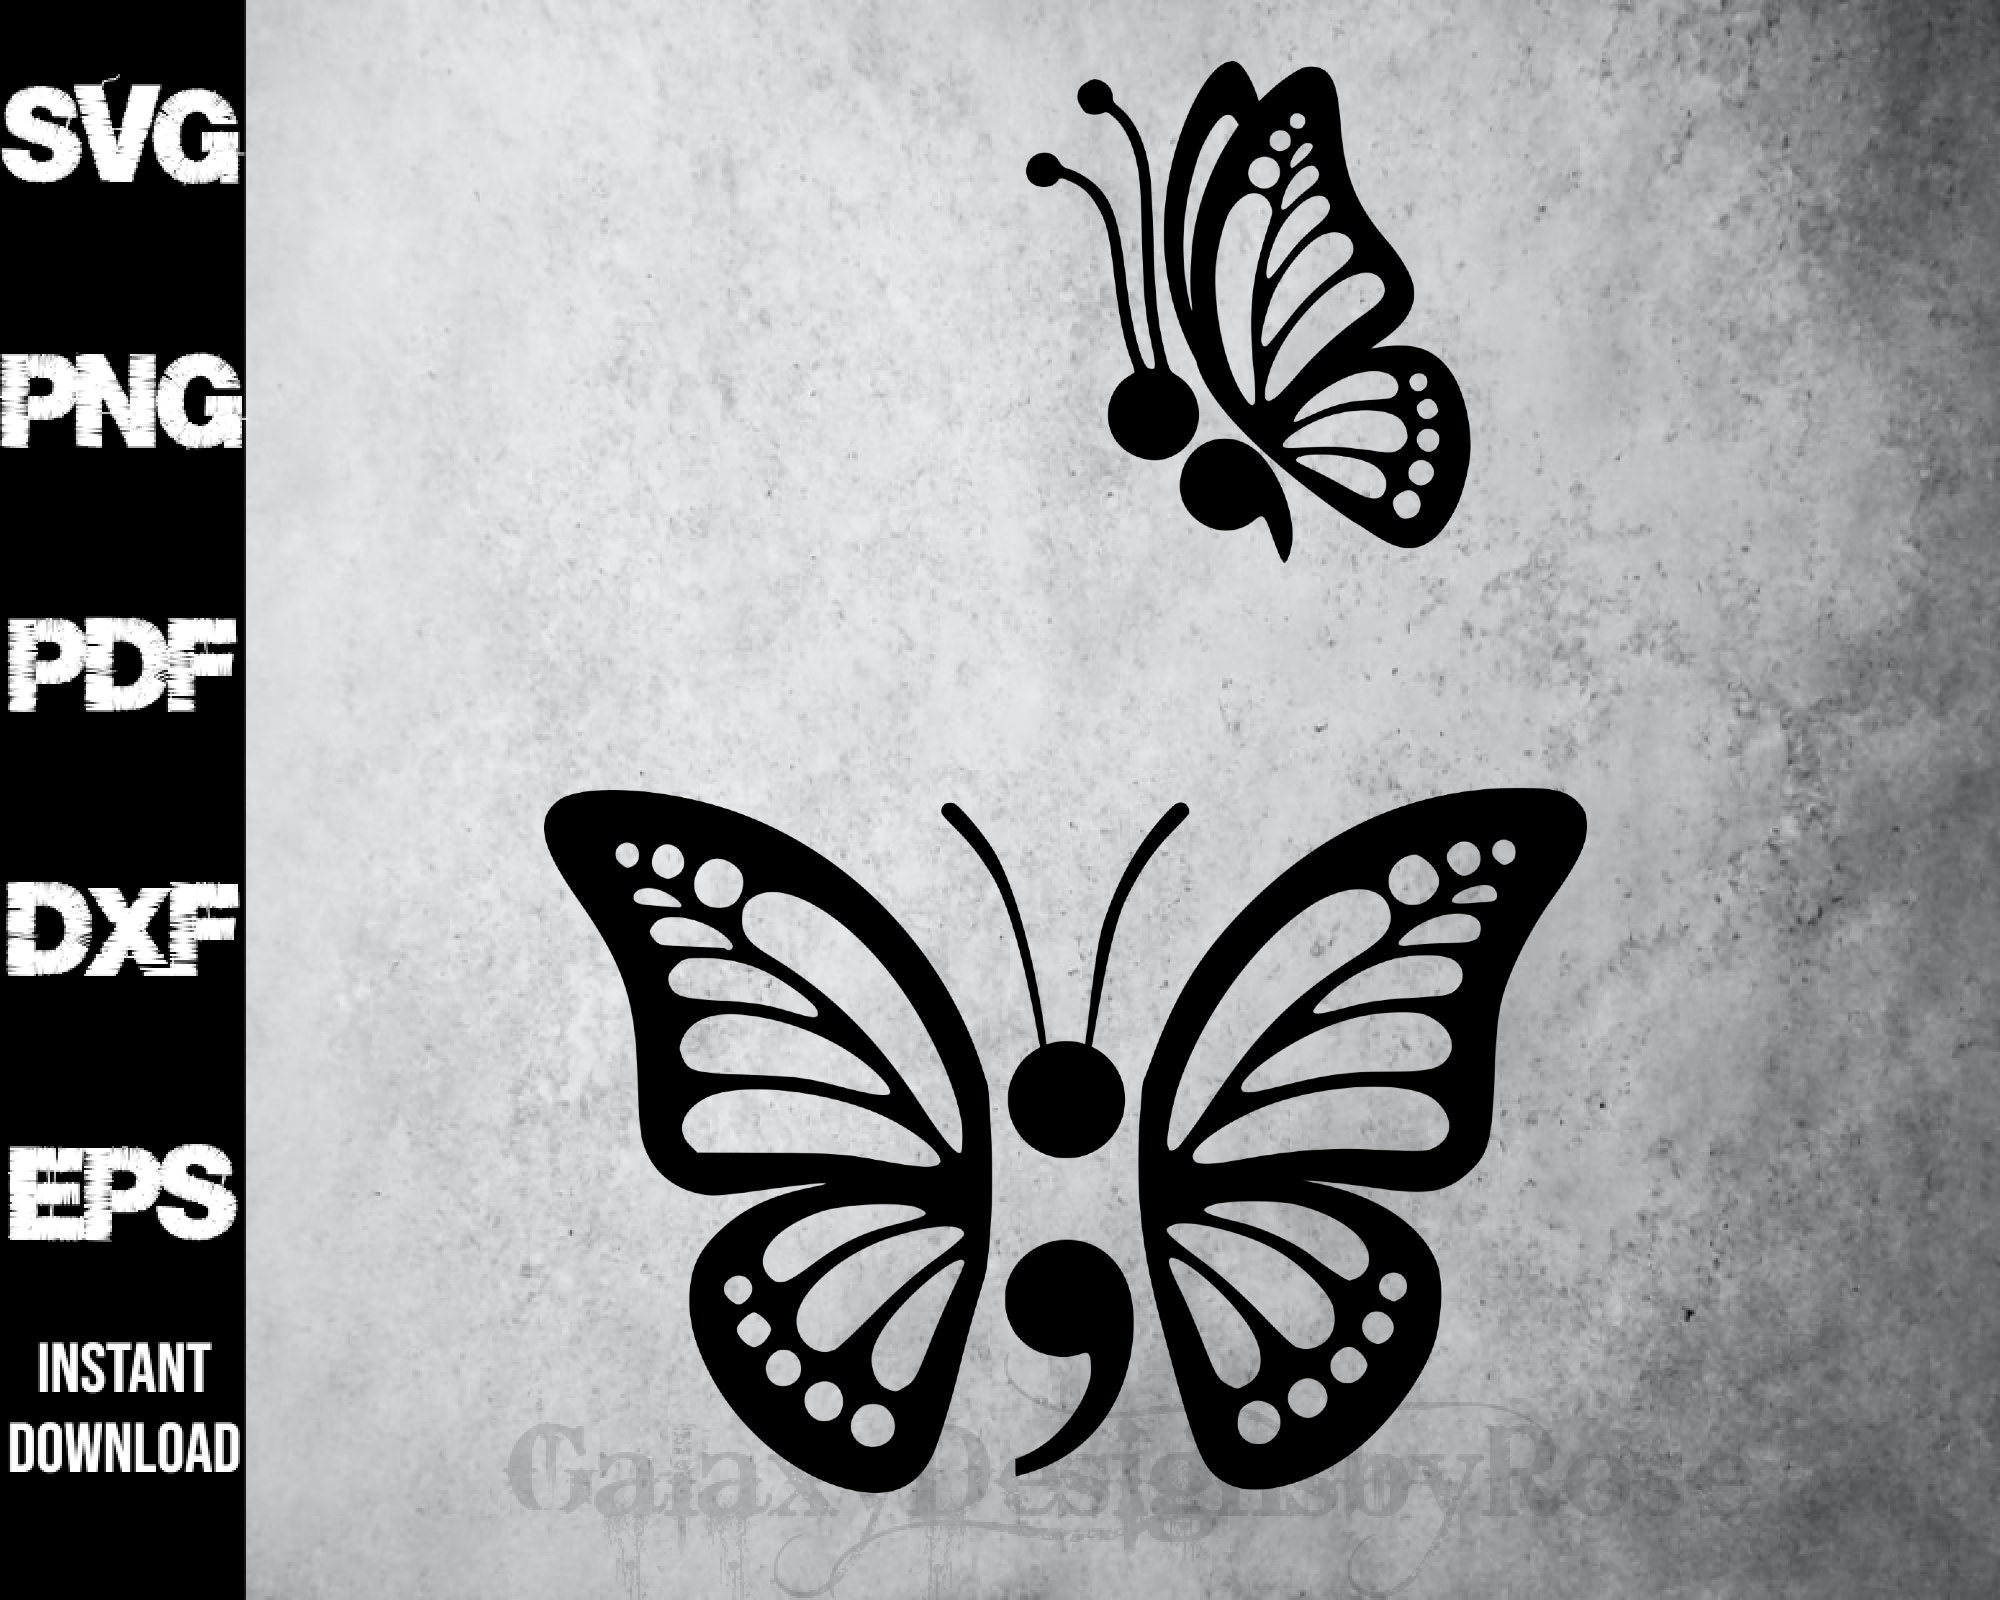 Ellie Tattoo / Butterfly SVG / DXF / PNG File Cutting File -  UK